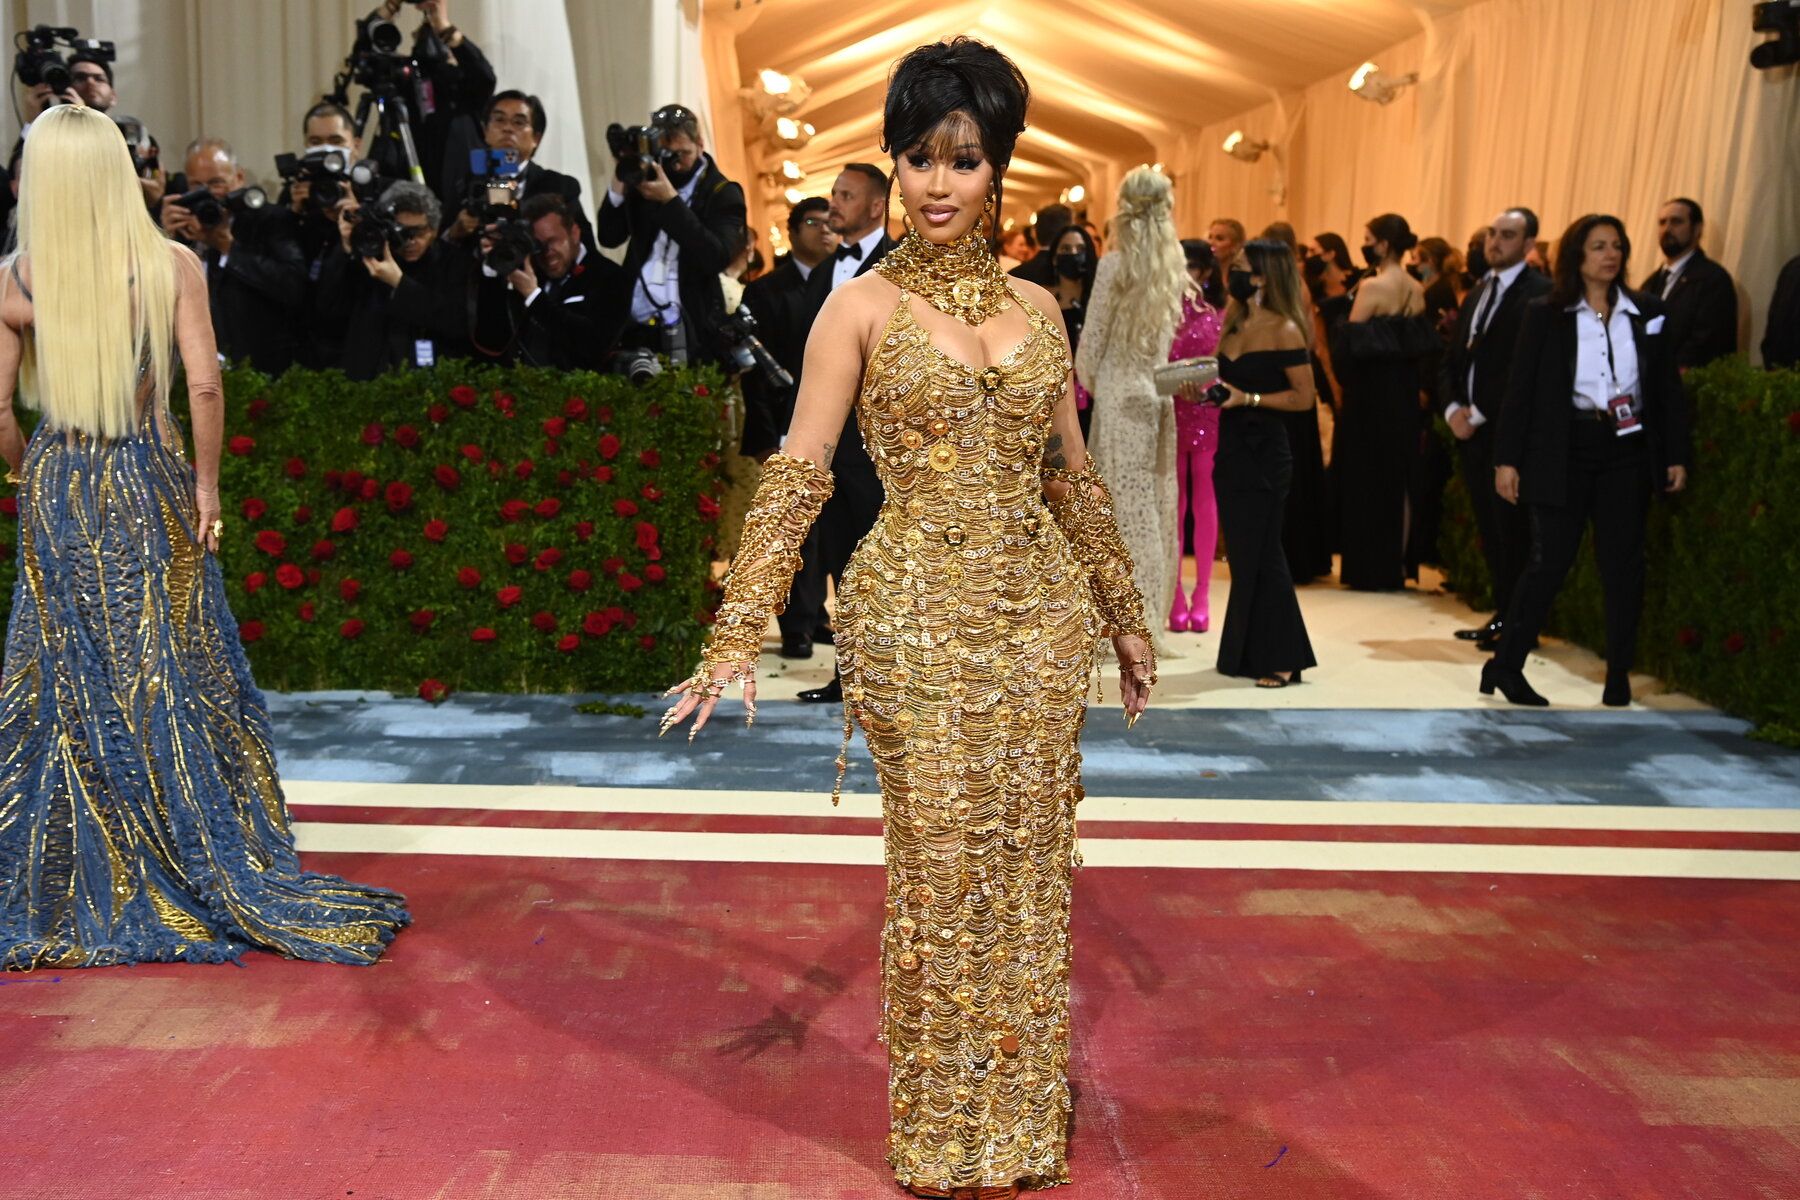 Cardi B wearing a golden choker necklace by Versace to the Met Gala 2022. Photo credit: The New York Times